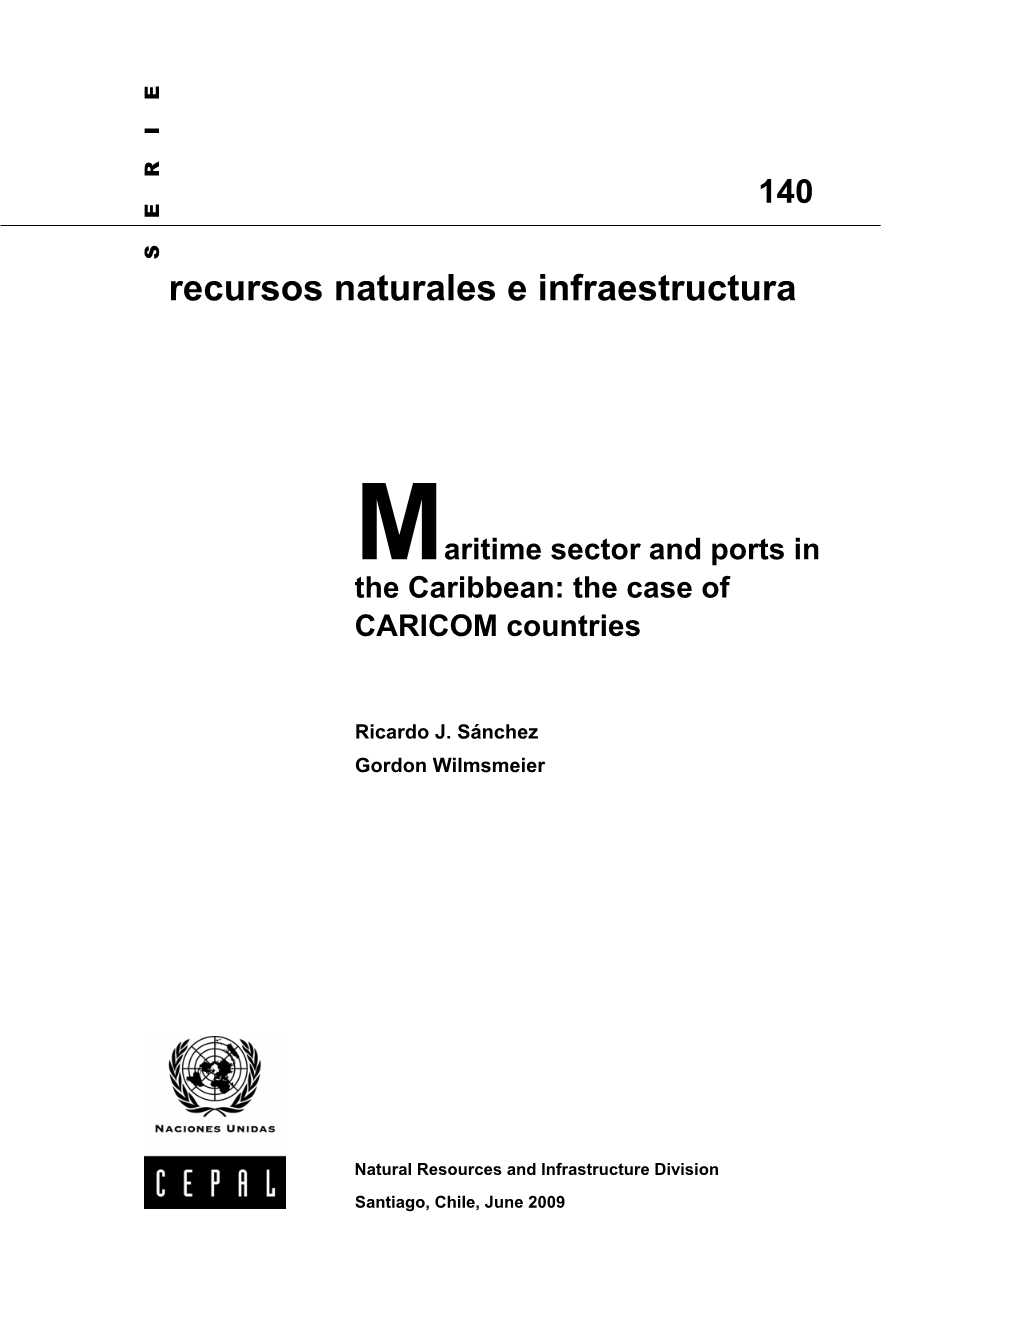 Maritime Sector and Ports in the Caribbean: the Case of CARICOM Countries